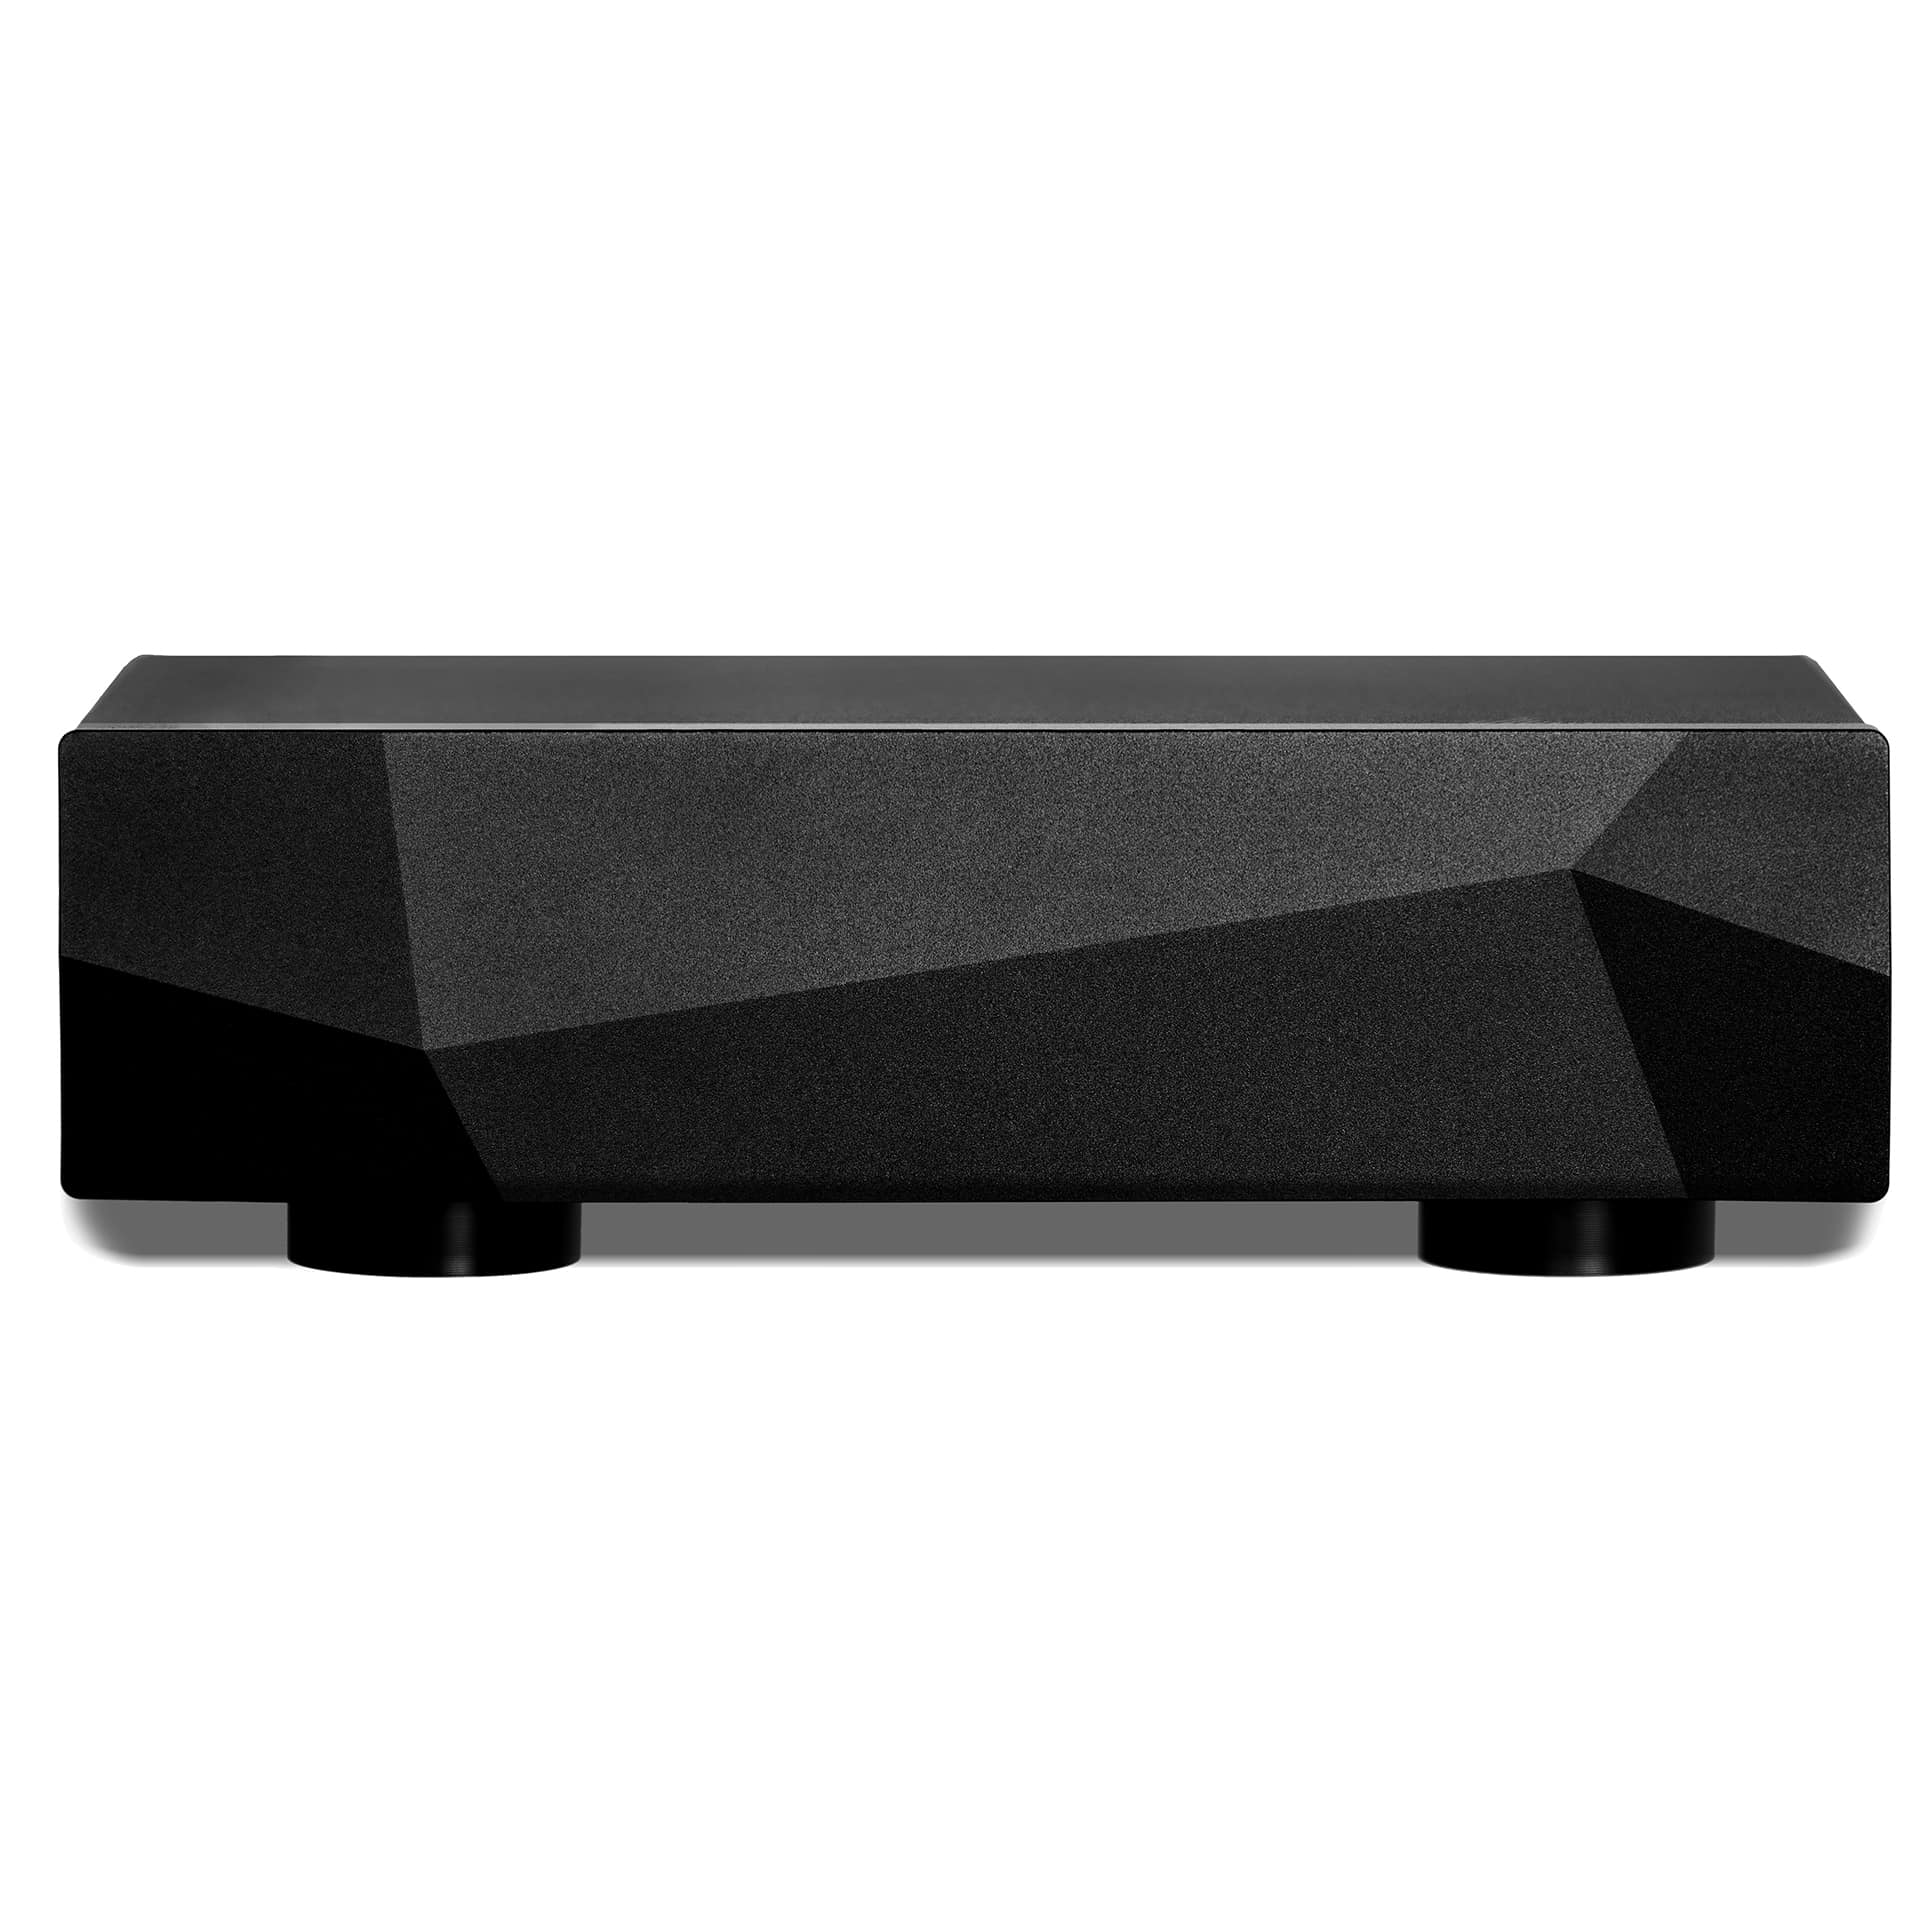 PULSEmini Streaming Network Player By Innuos